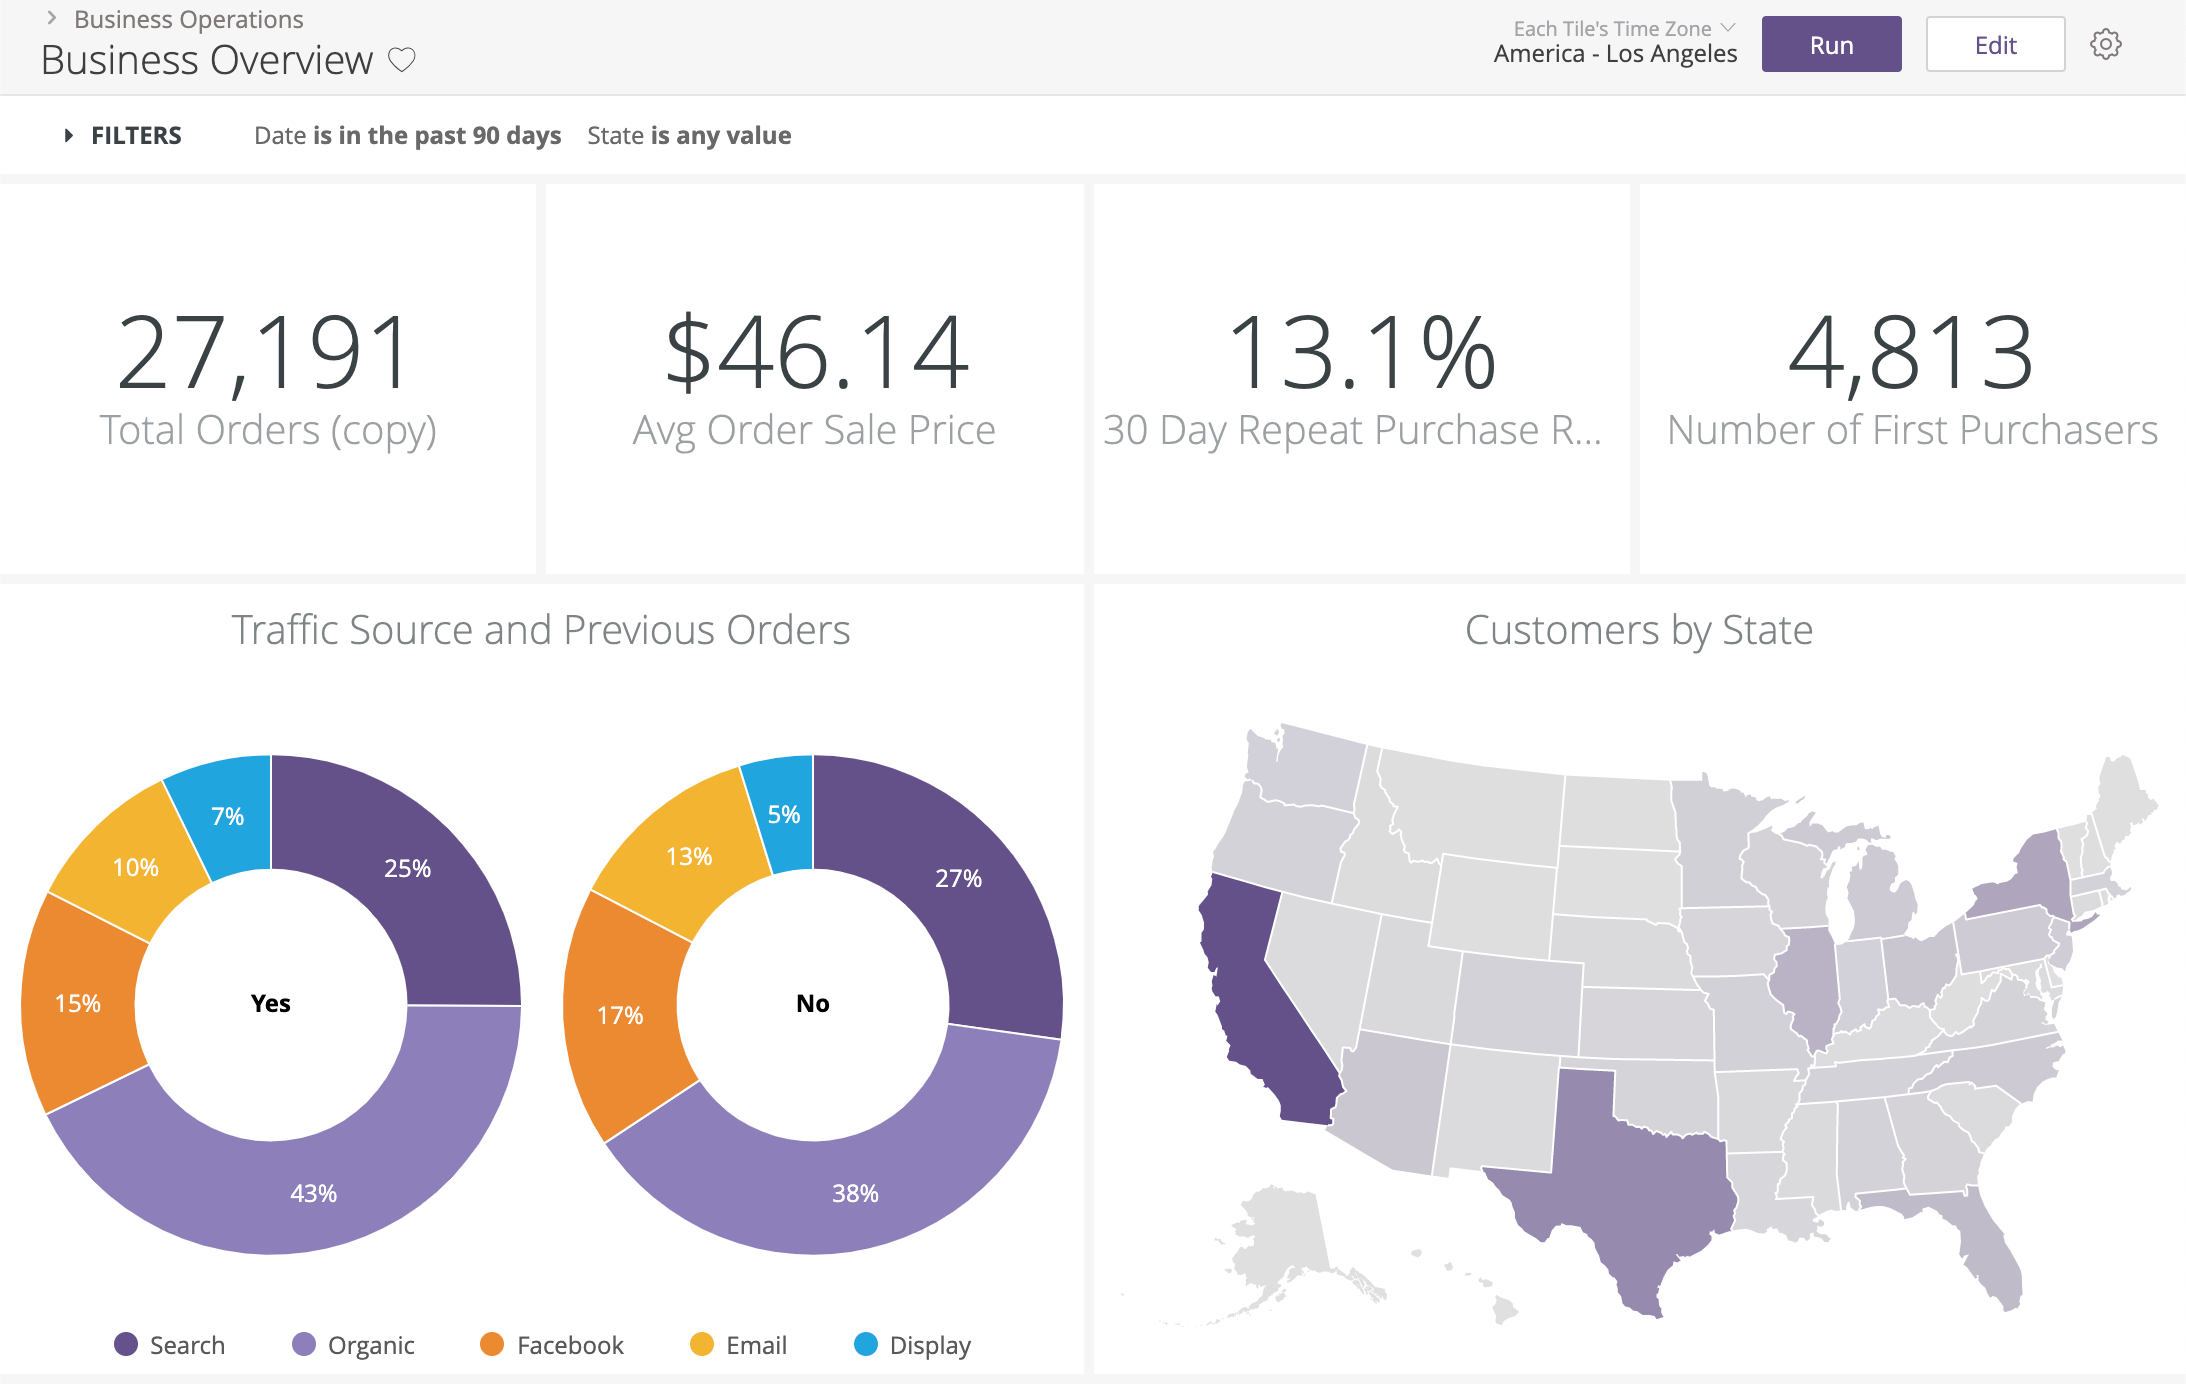 Together BQ and Looker provide rich, interactive dashboards and